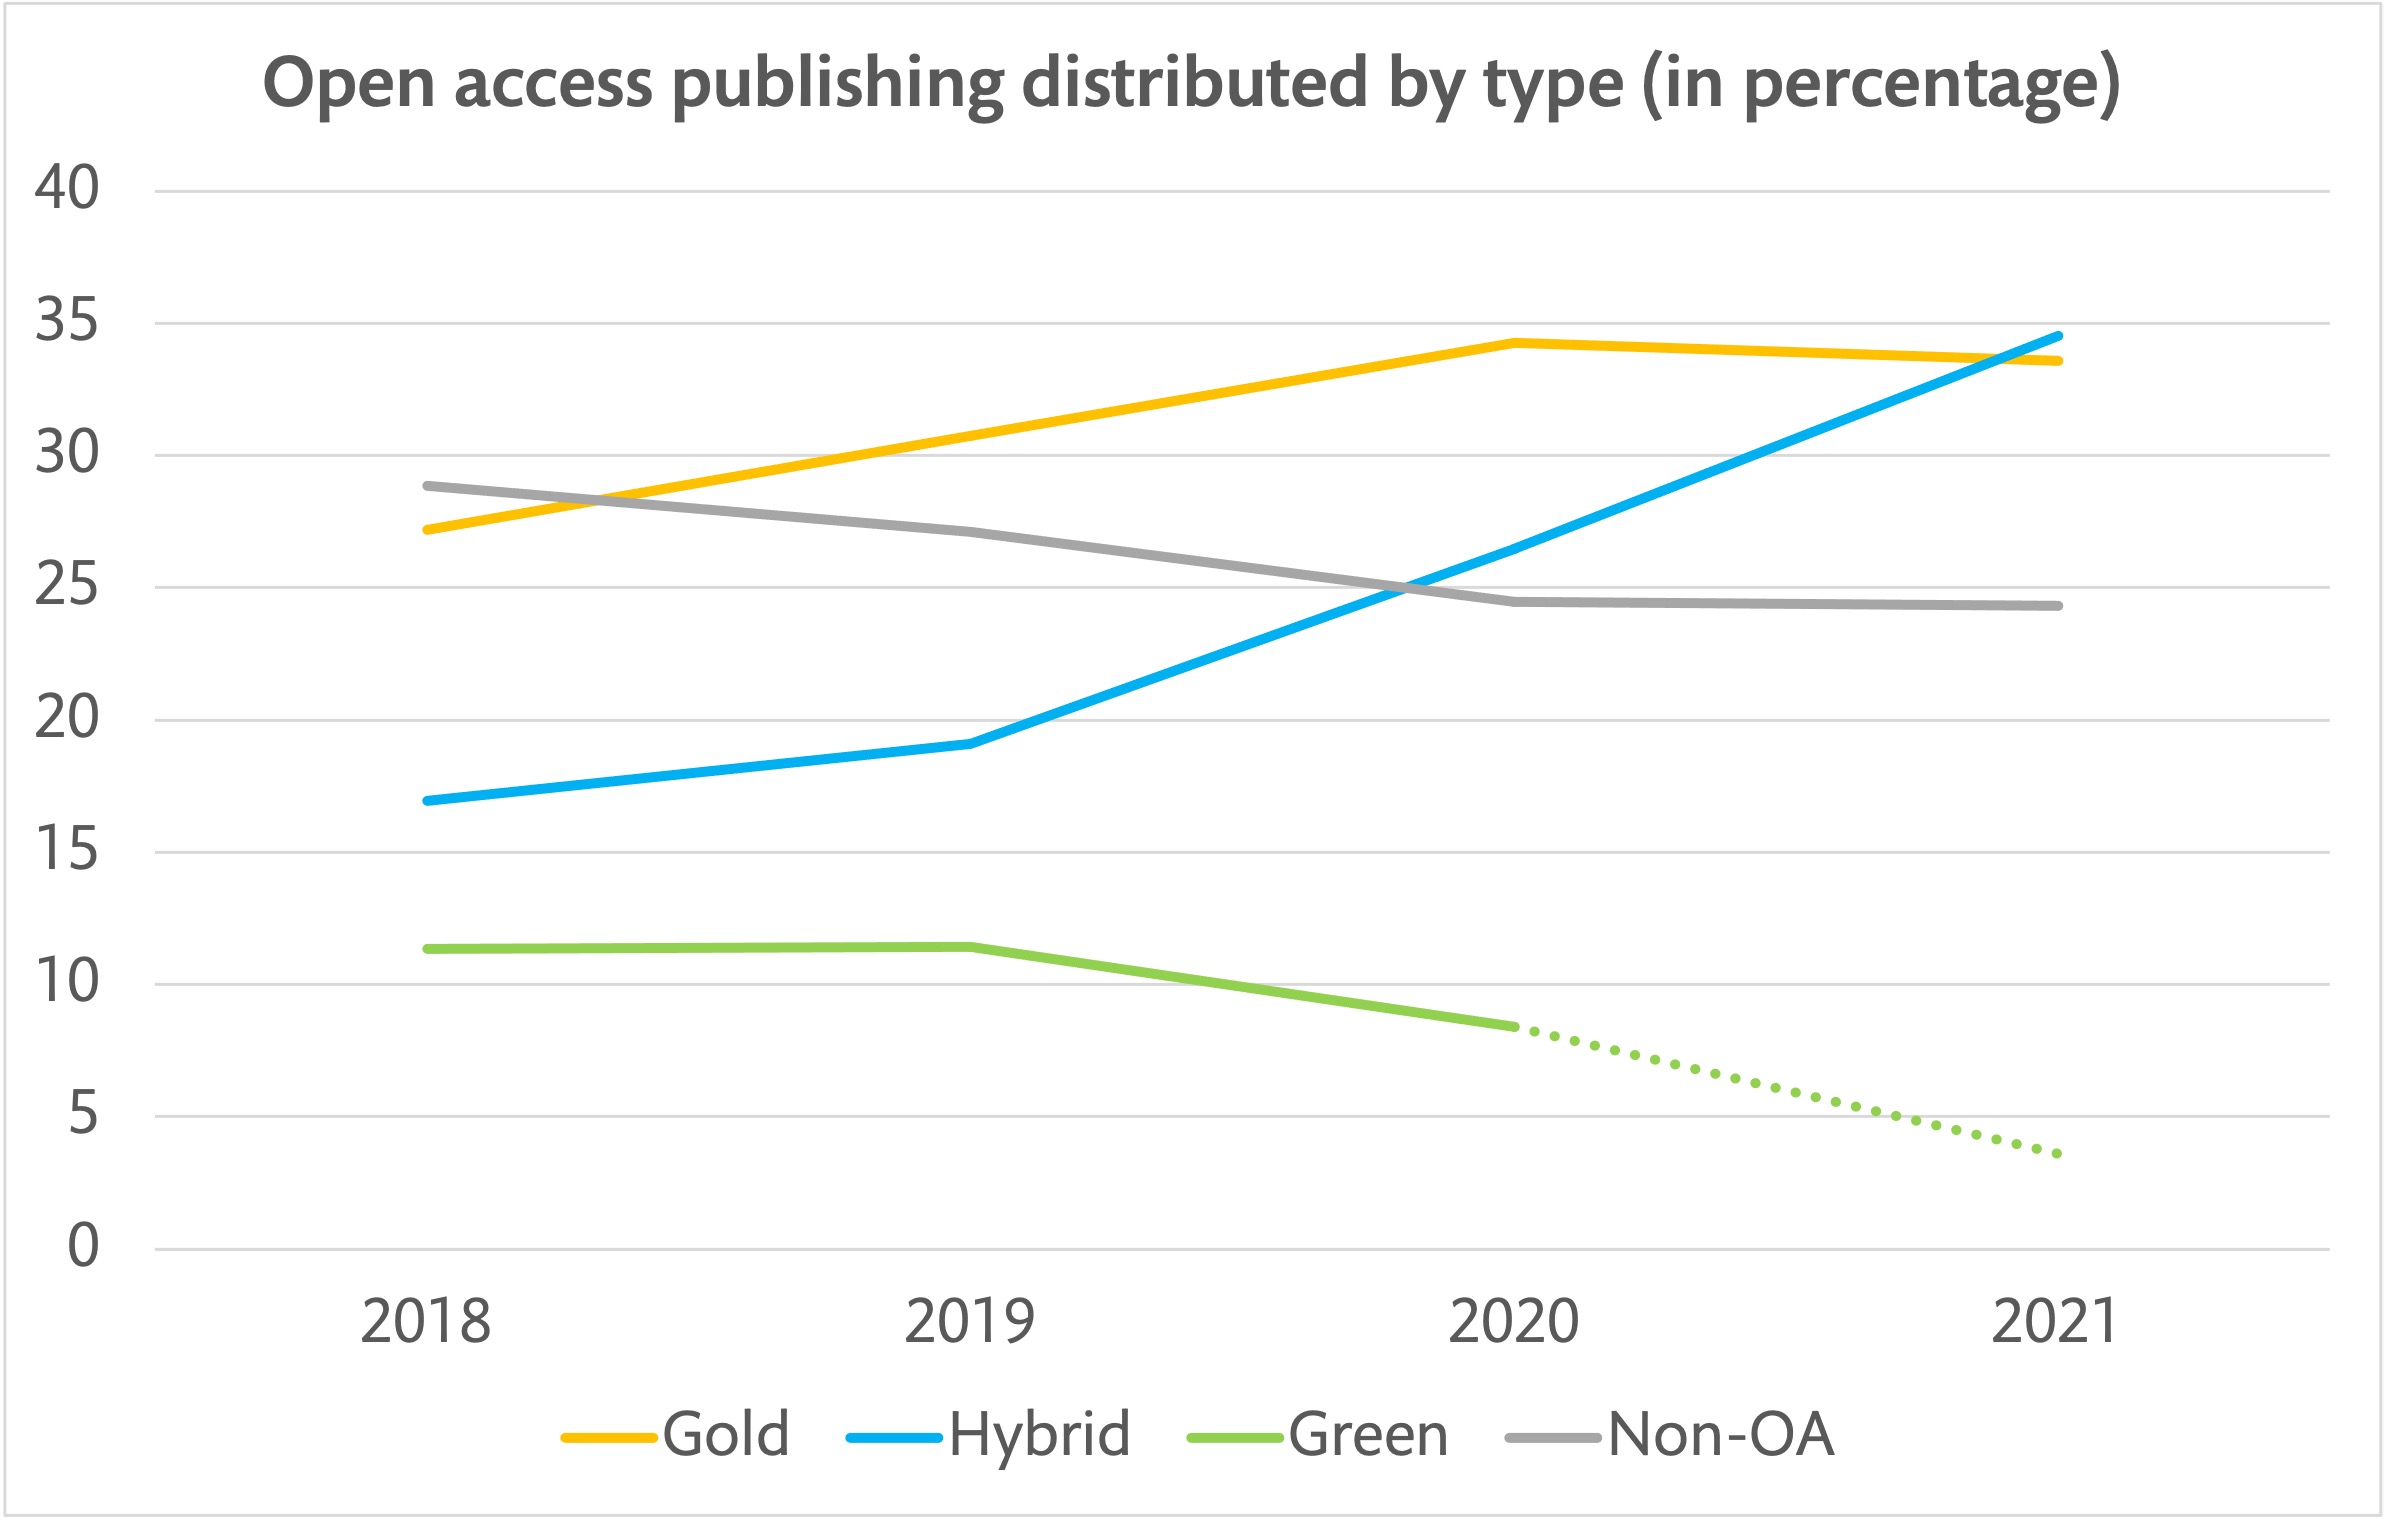 Chart showing an increased percentage of hybrid and gold open access publishing 2018-2021. Non-open access and green open access decreases. Hybrid open access has the sharpest increase, from 17% 2018 to 35% 2021. Gold open access increases from 27 to 34%.